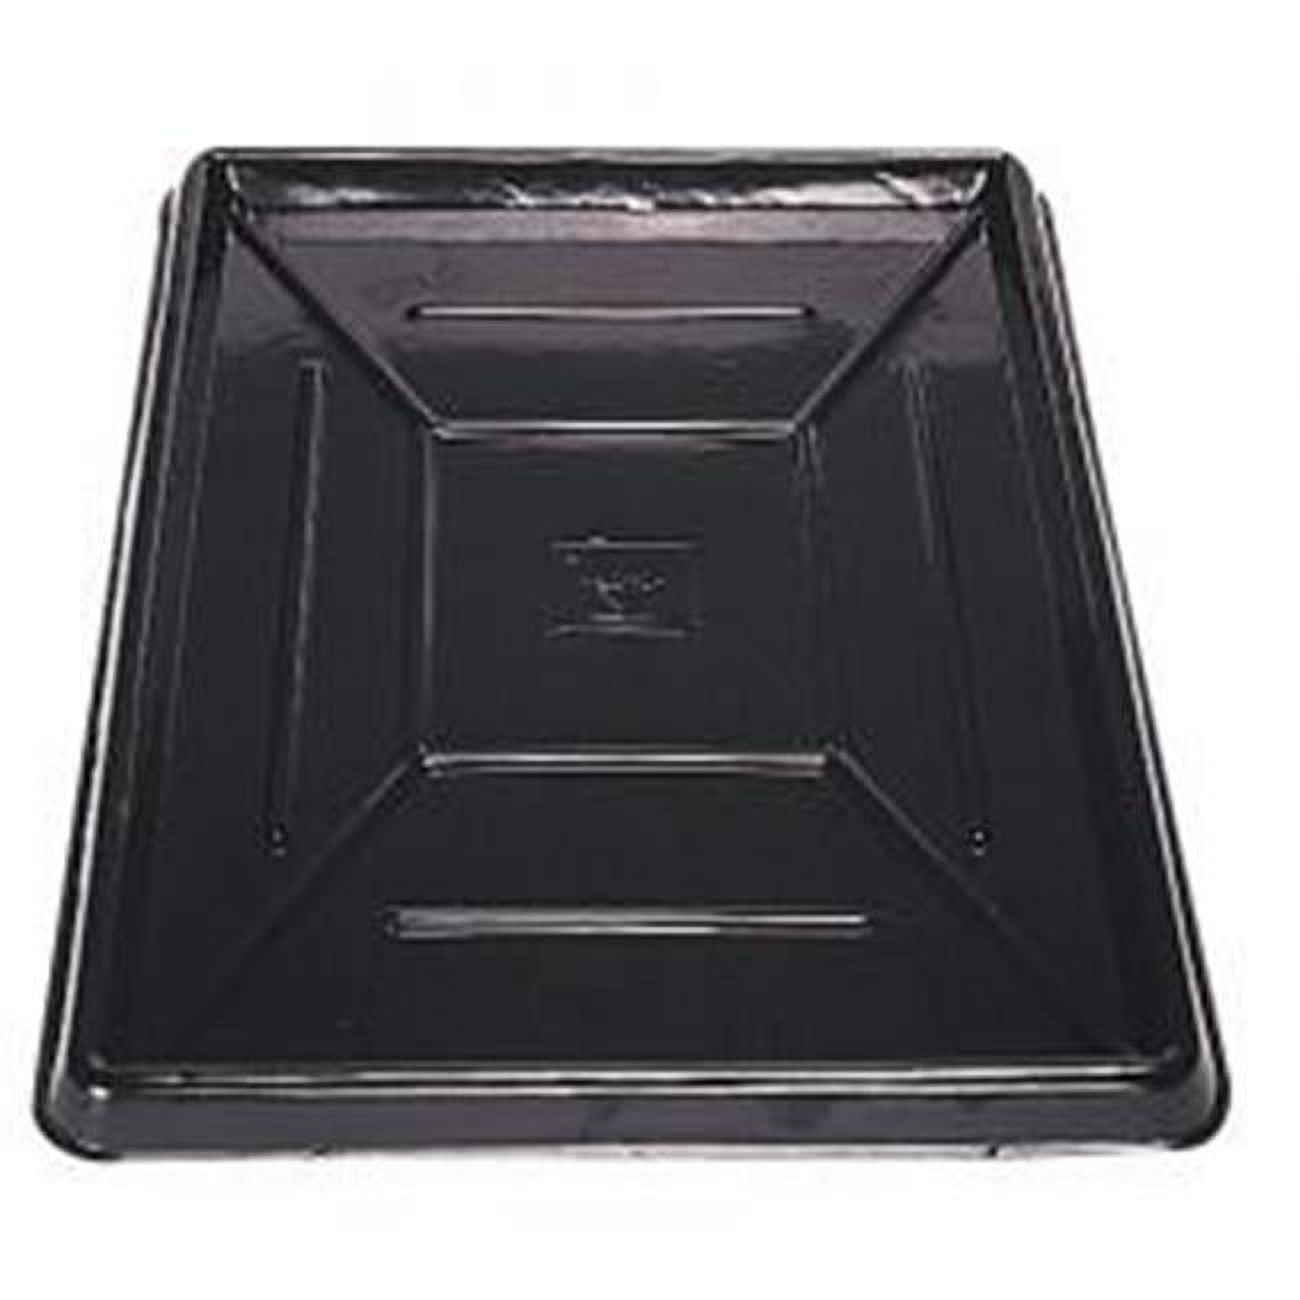 TC18141 Catch-All Drip Pan - image 1 of 1